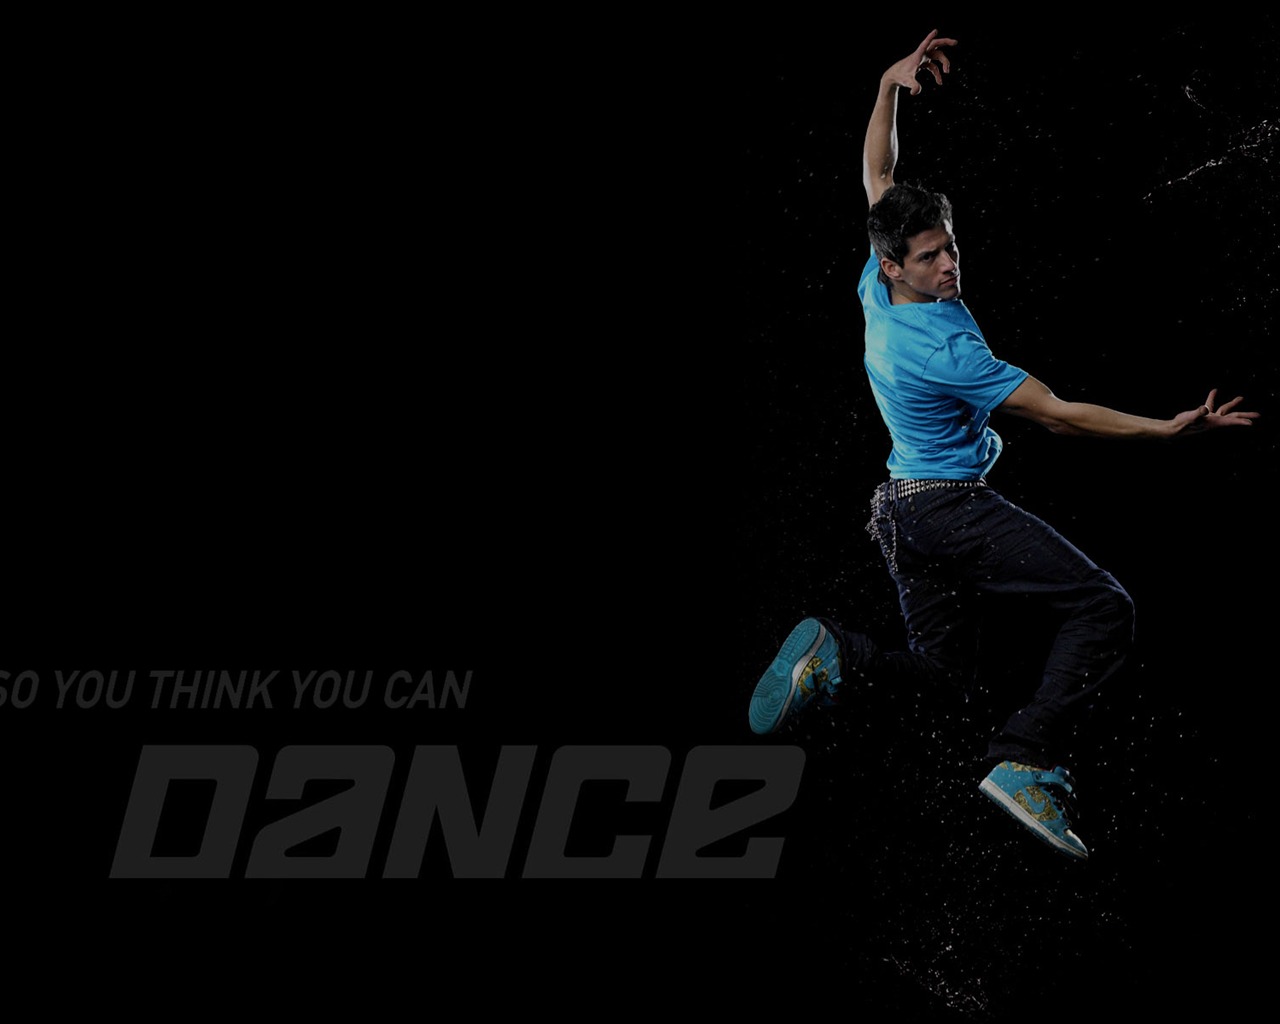 So You Think You Can Dance 舞林争霸 壁纸(二)18 - 1280x1024